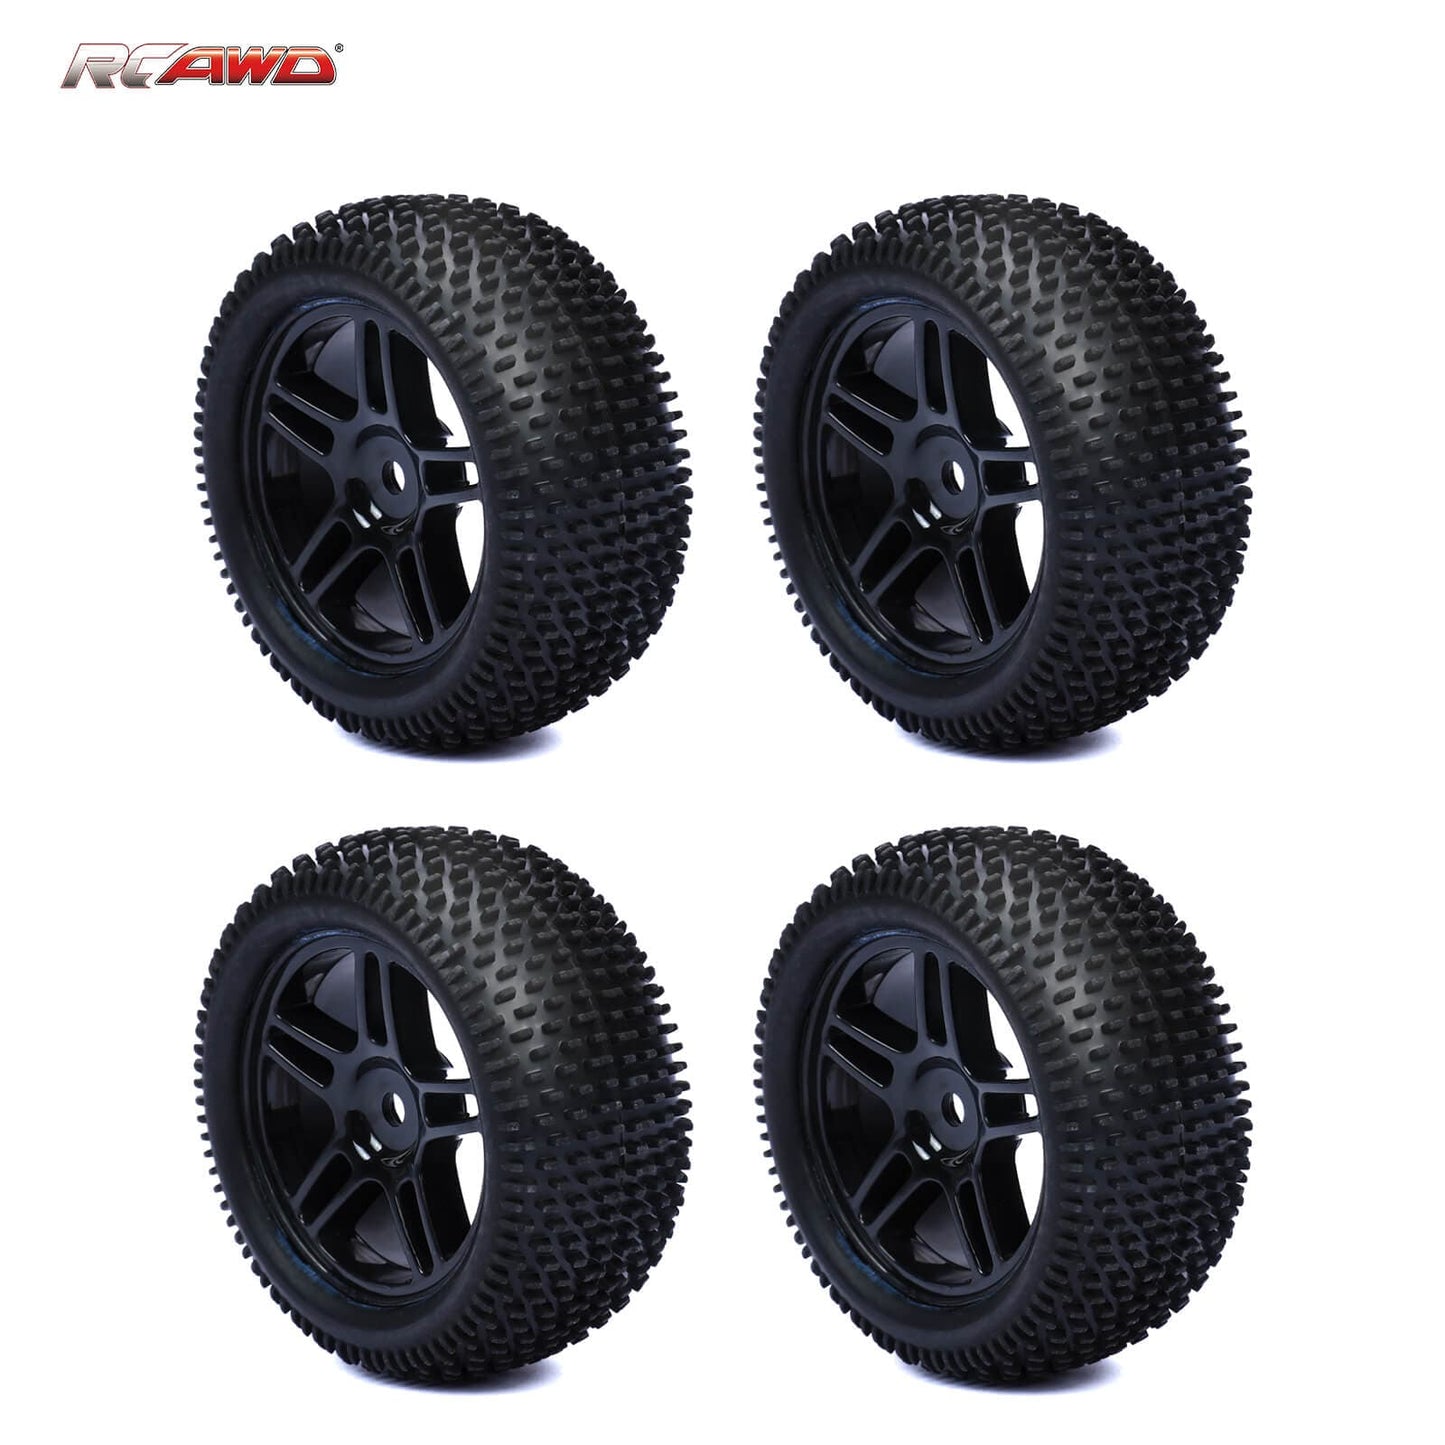 RCAWD Amazon RC Wheel & Tires 5 spokes RCAWD 2.05'' 82*40mm 1/16 Pre-glued RC off-road Buggy wheel Tires LG-009BL LG-010BL